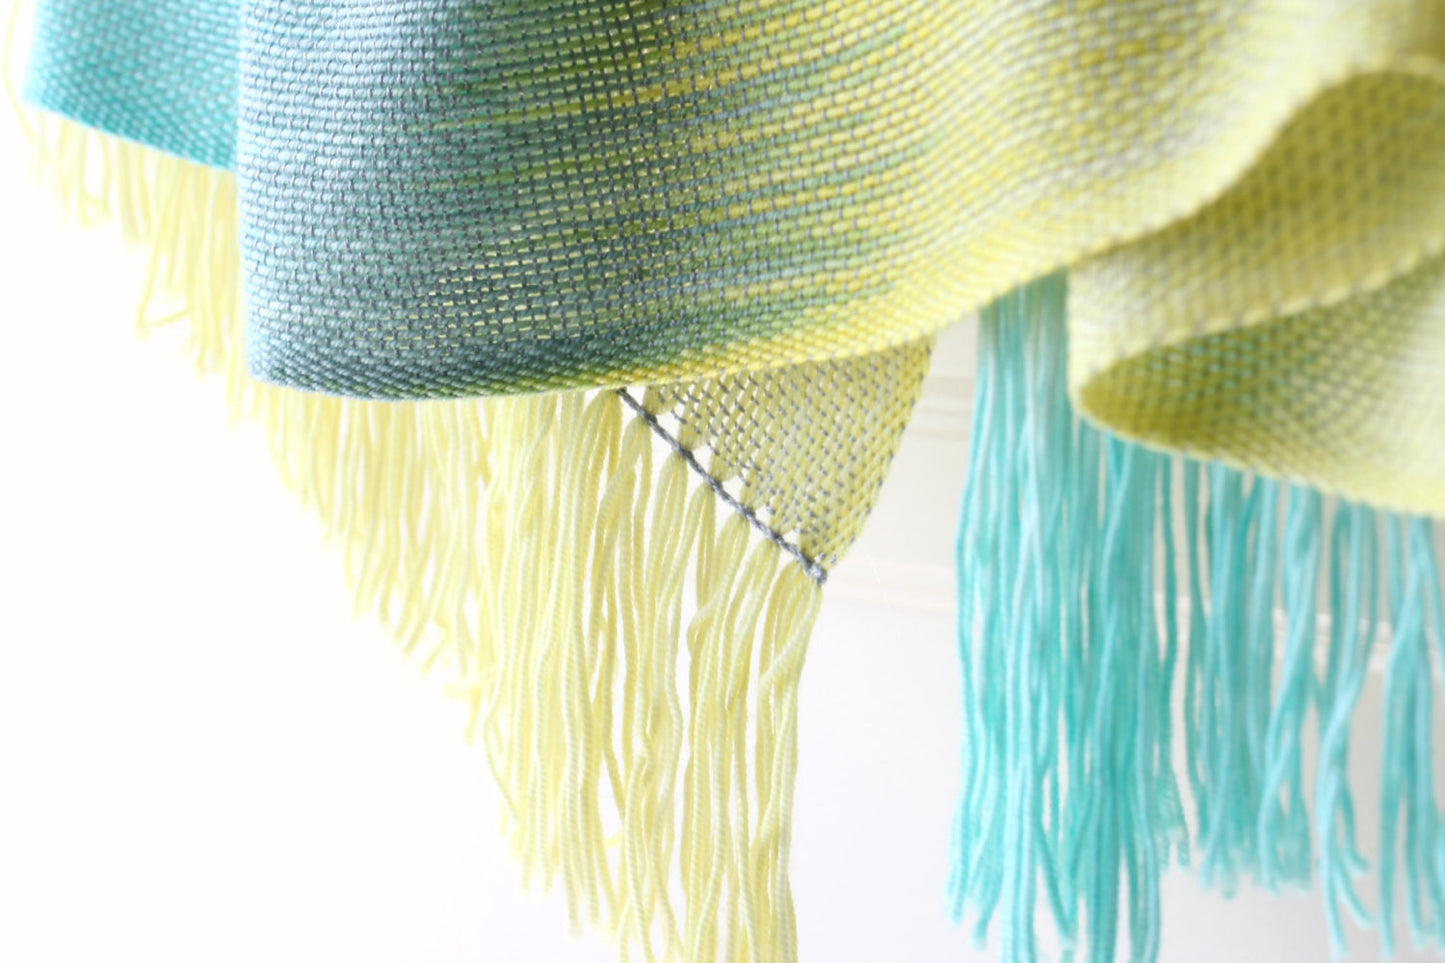 Woven scarf in yellow, green and blue grey colors